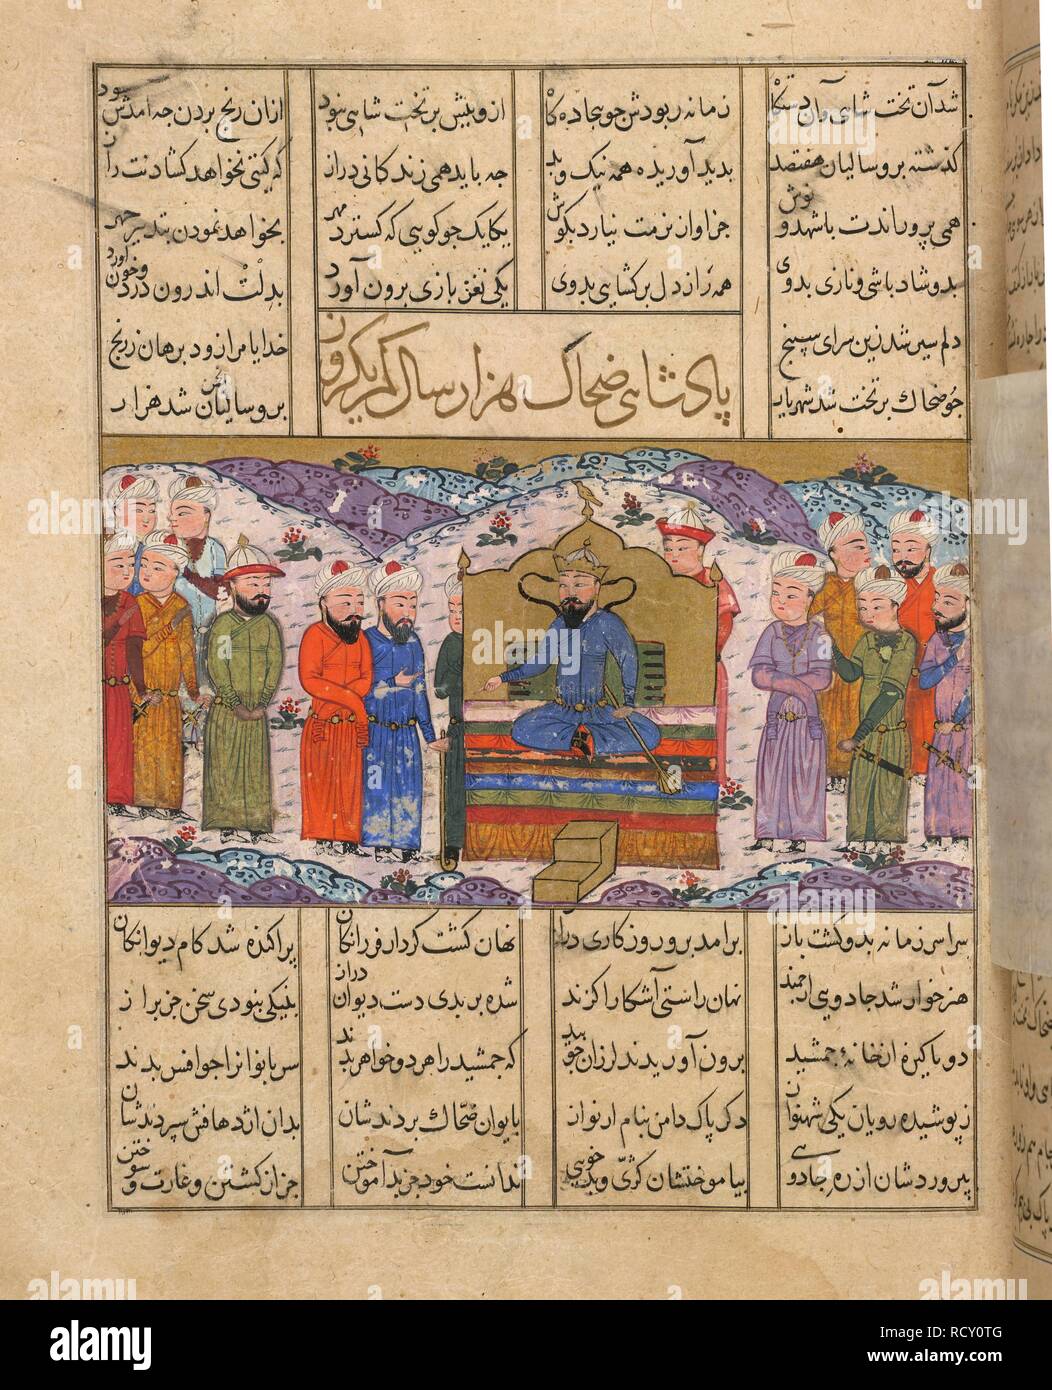 Zuhhak enthroned. Shahnama. Iran, 1446. Zuhhak enthroned. A miniature painting from a fifteenth century manuscript of the epic poem of Shahnama.  Image taken from Shahnama.  Originally published/produced in Iran, 1446. . Source: Or. 12688, f.22. Language: Persian. Stock Photo